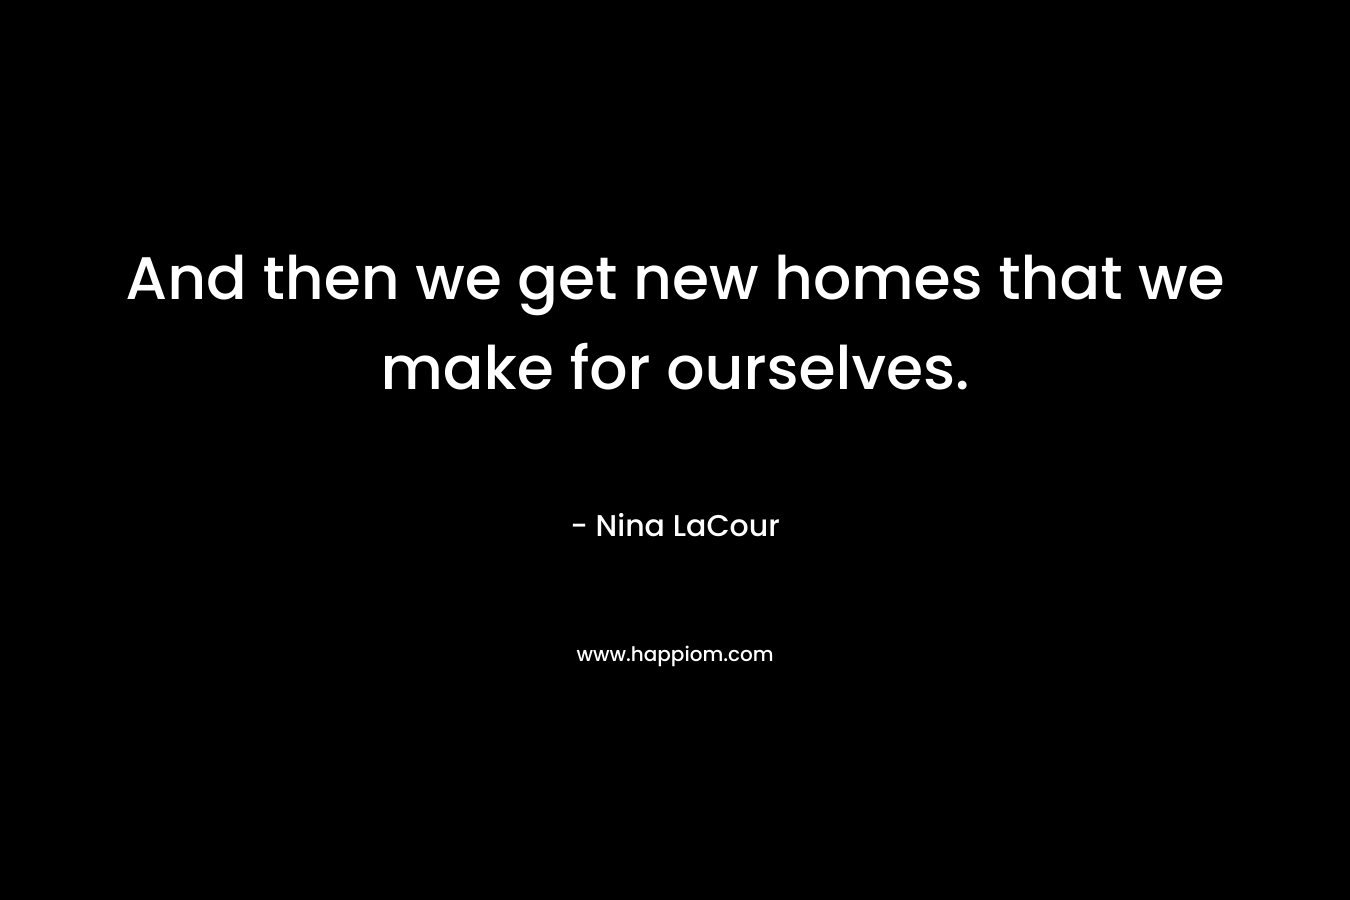 And then we get new homes that we make for ourselves. – Nina LaCour